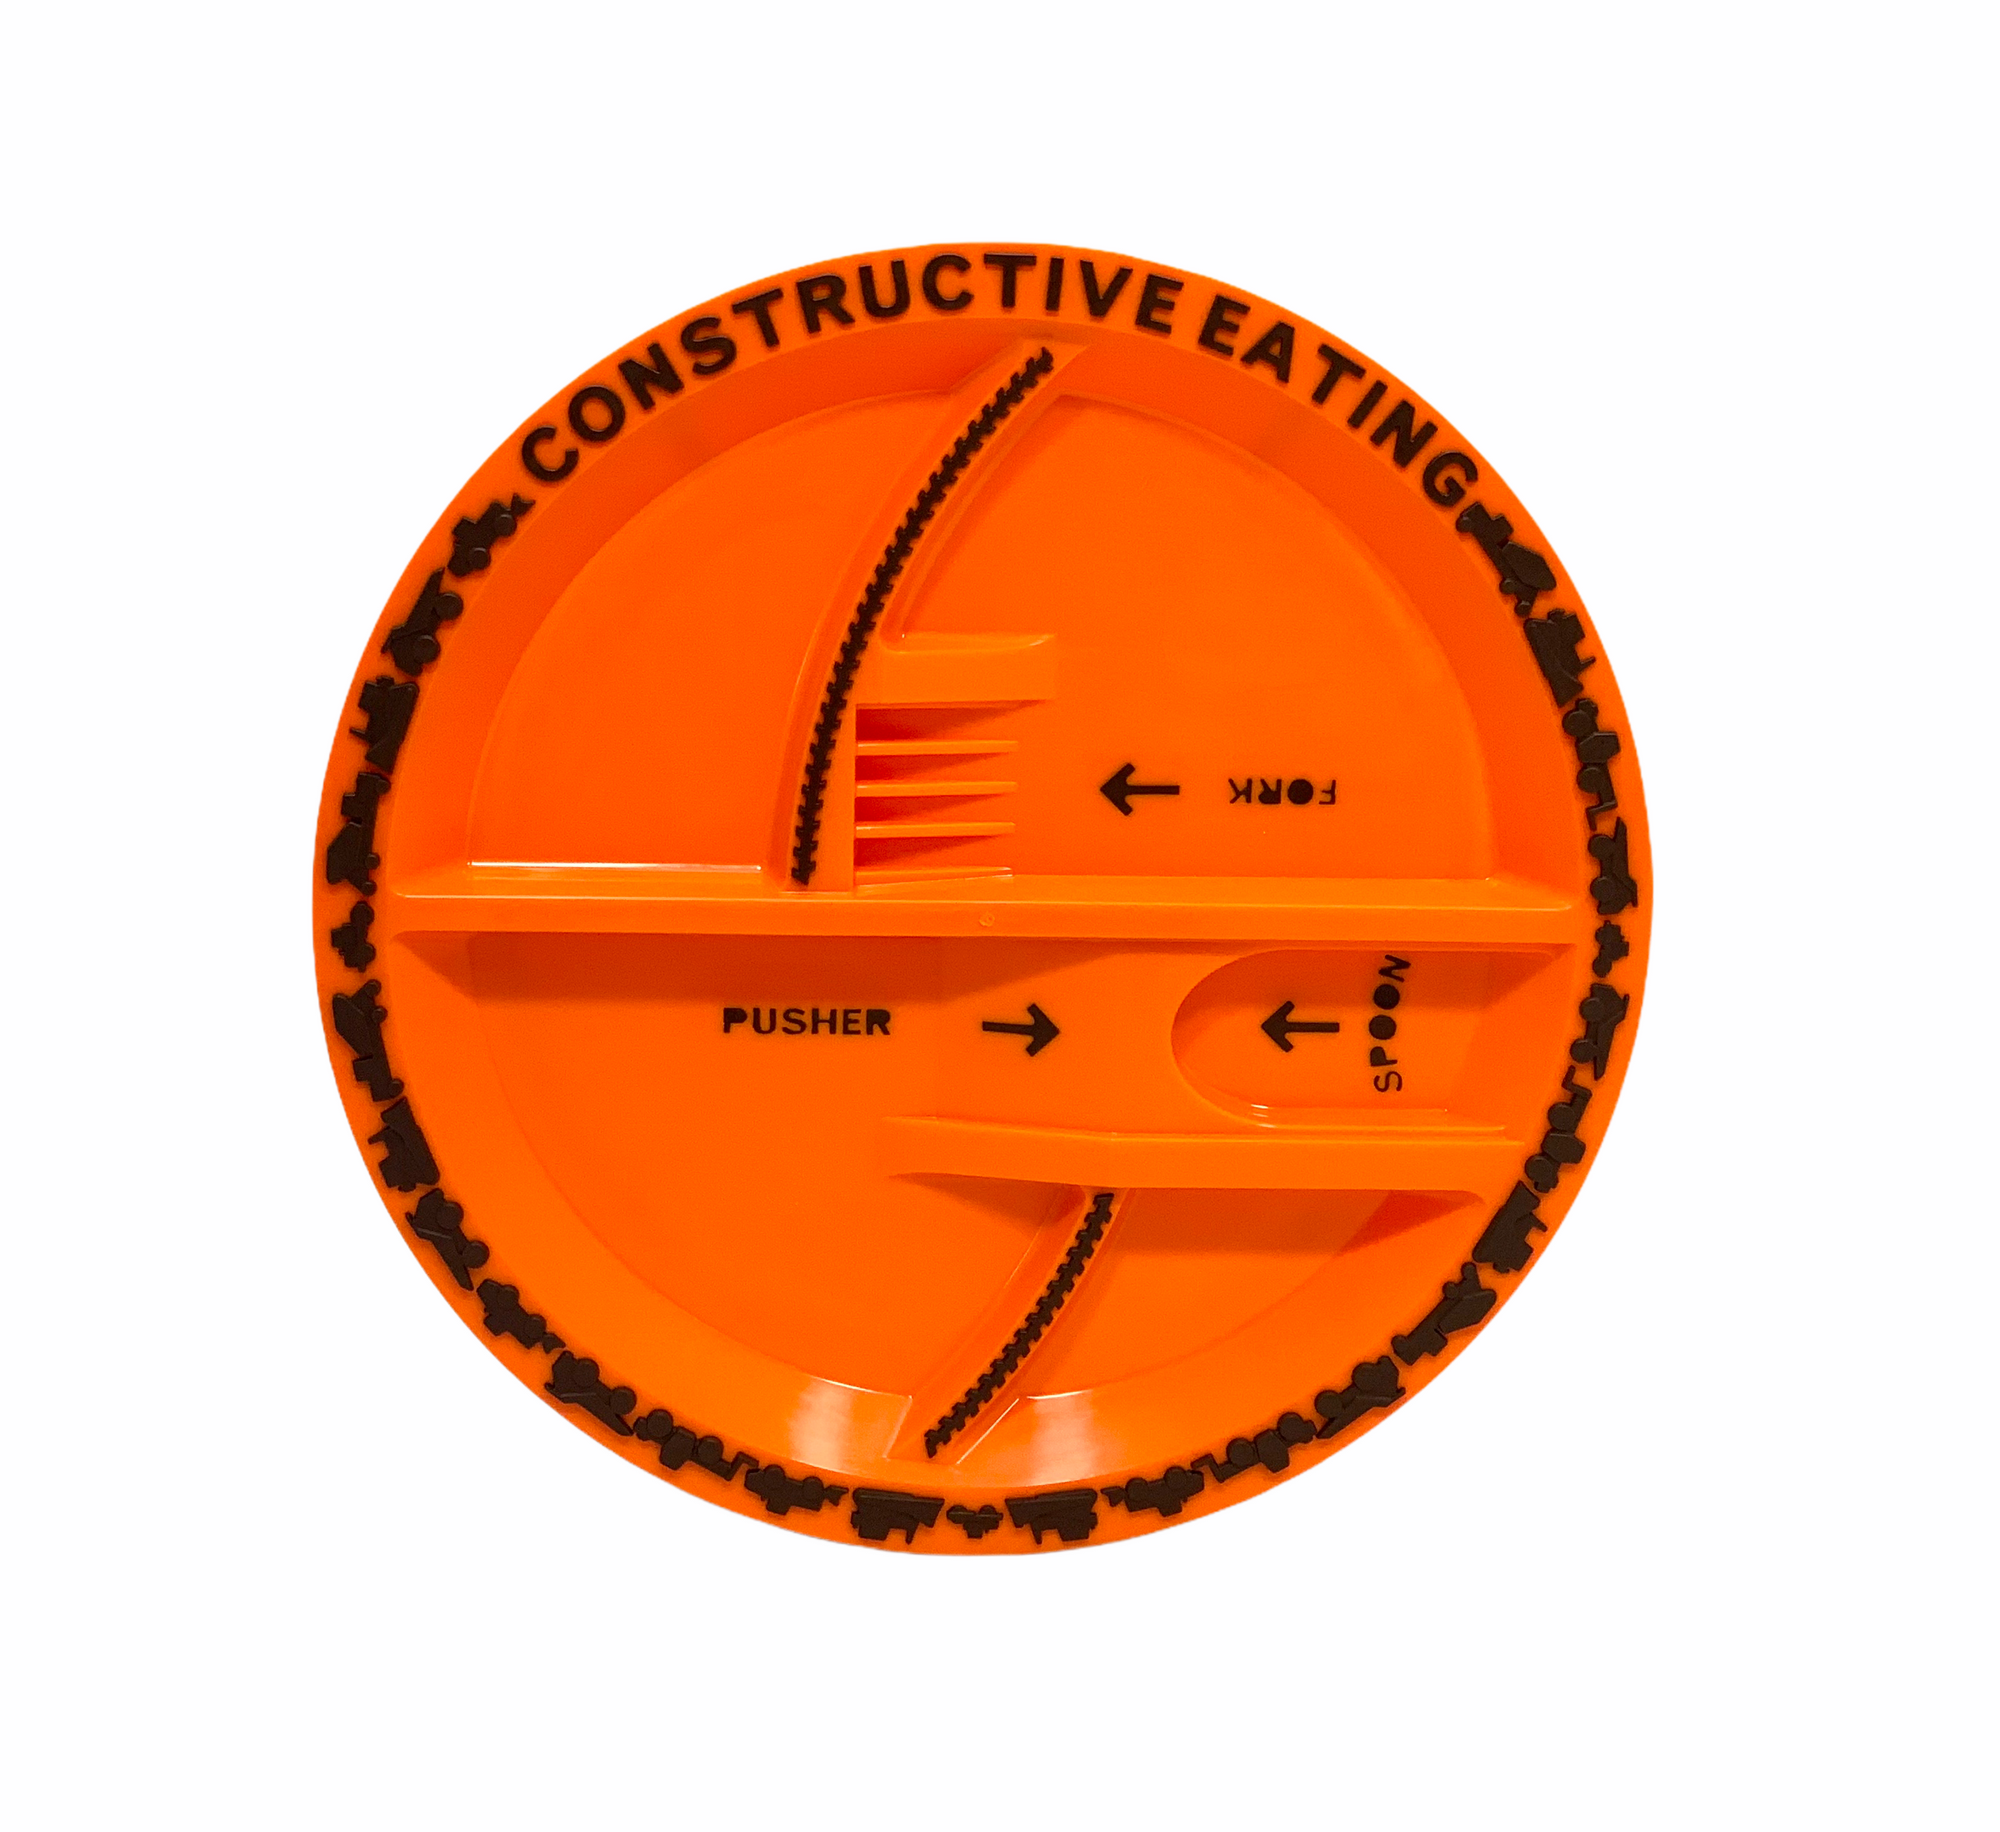 Orange Constructive Eating Plate - Construction with different sections on white background